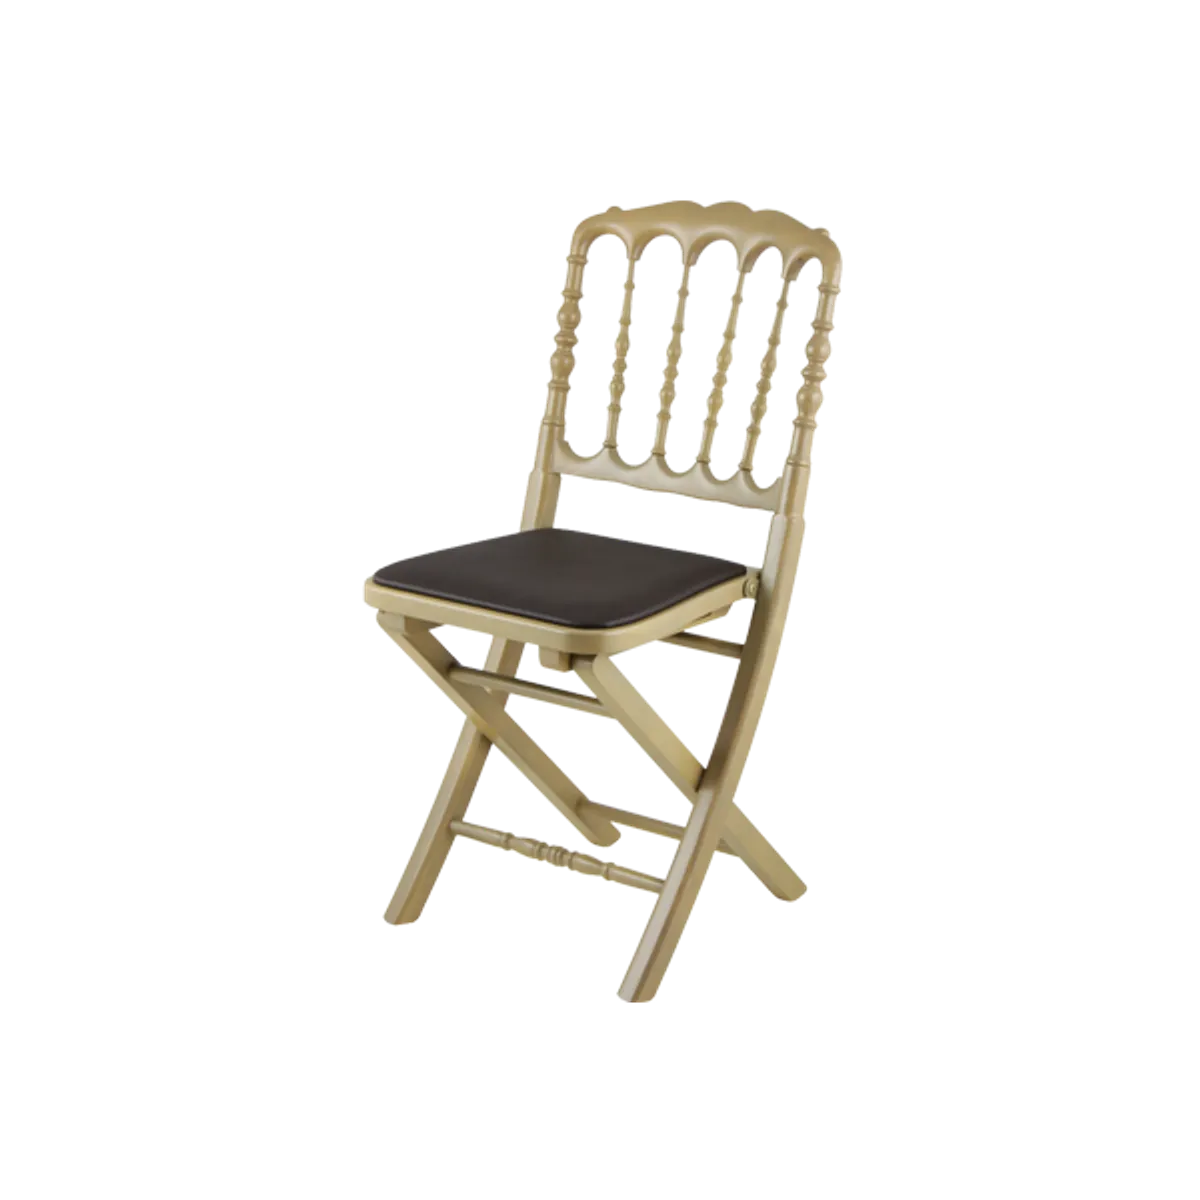 Antoinette folding chair Inside Out Contracts